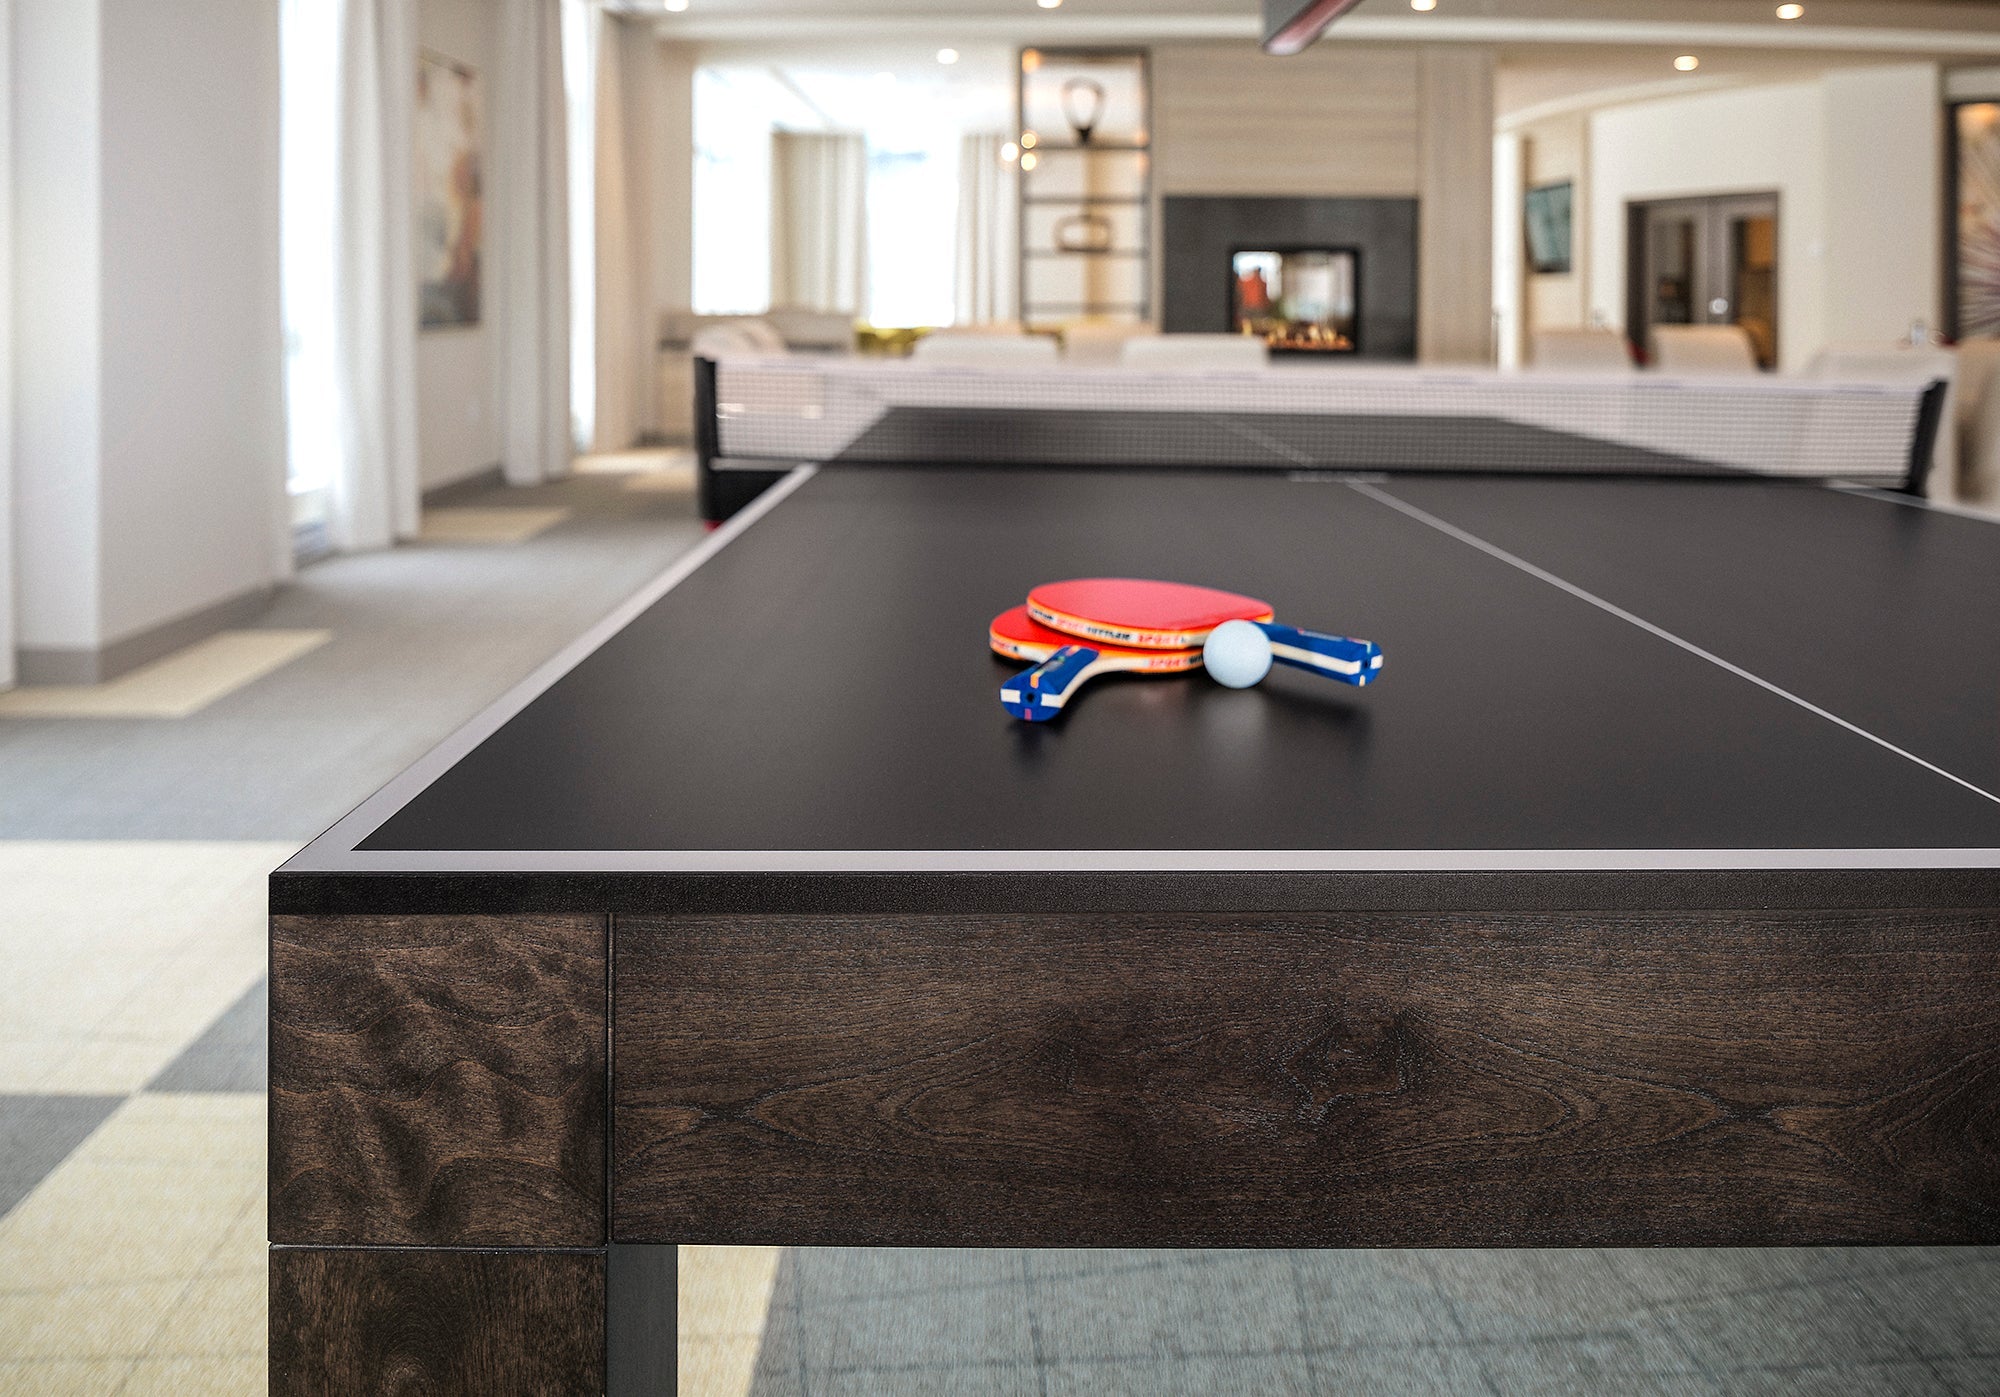 PING PONG TABLES